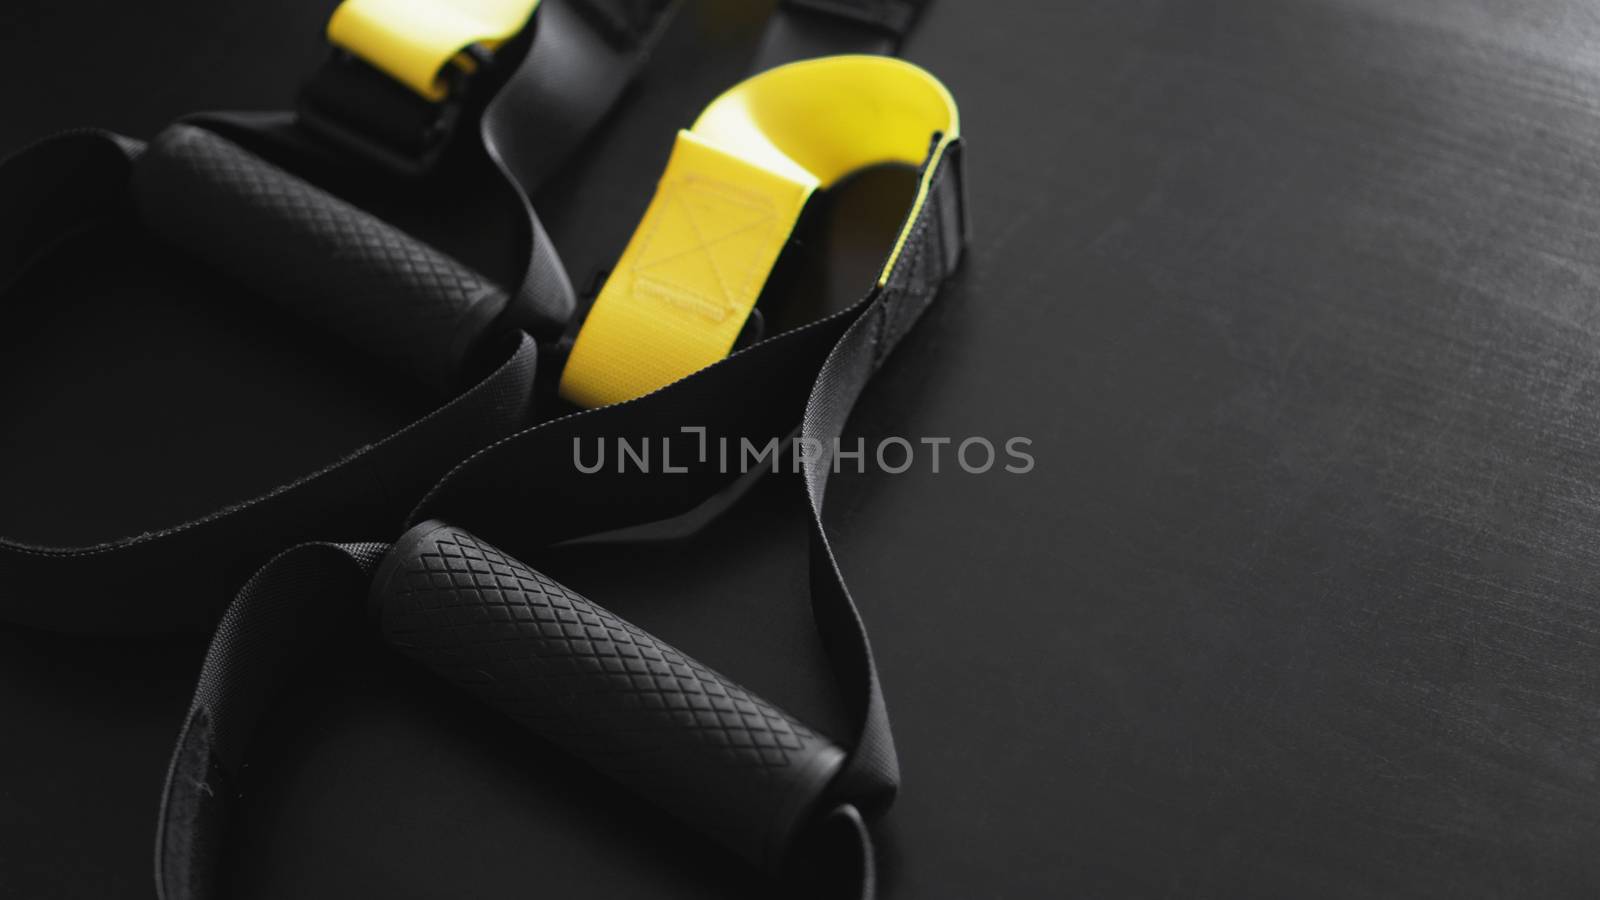 Black and yellow strap functional training equipment on grey background. Sport accessories. Fitness and Gym workout items for Healthy. Banner TRX